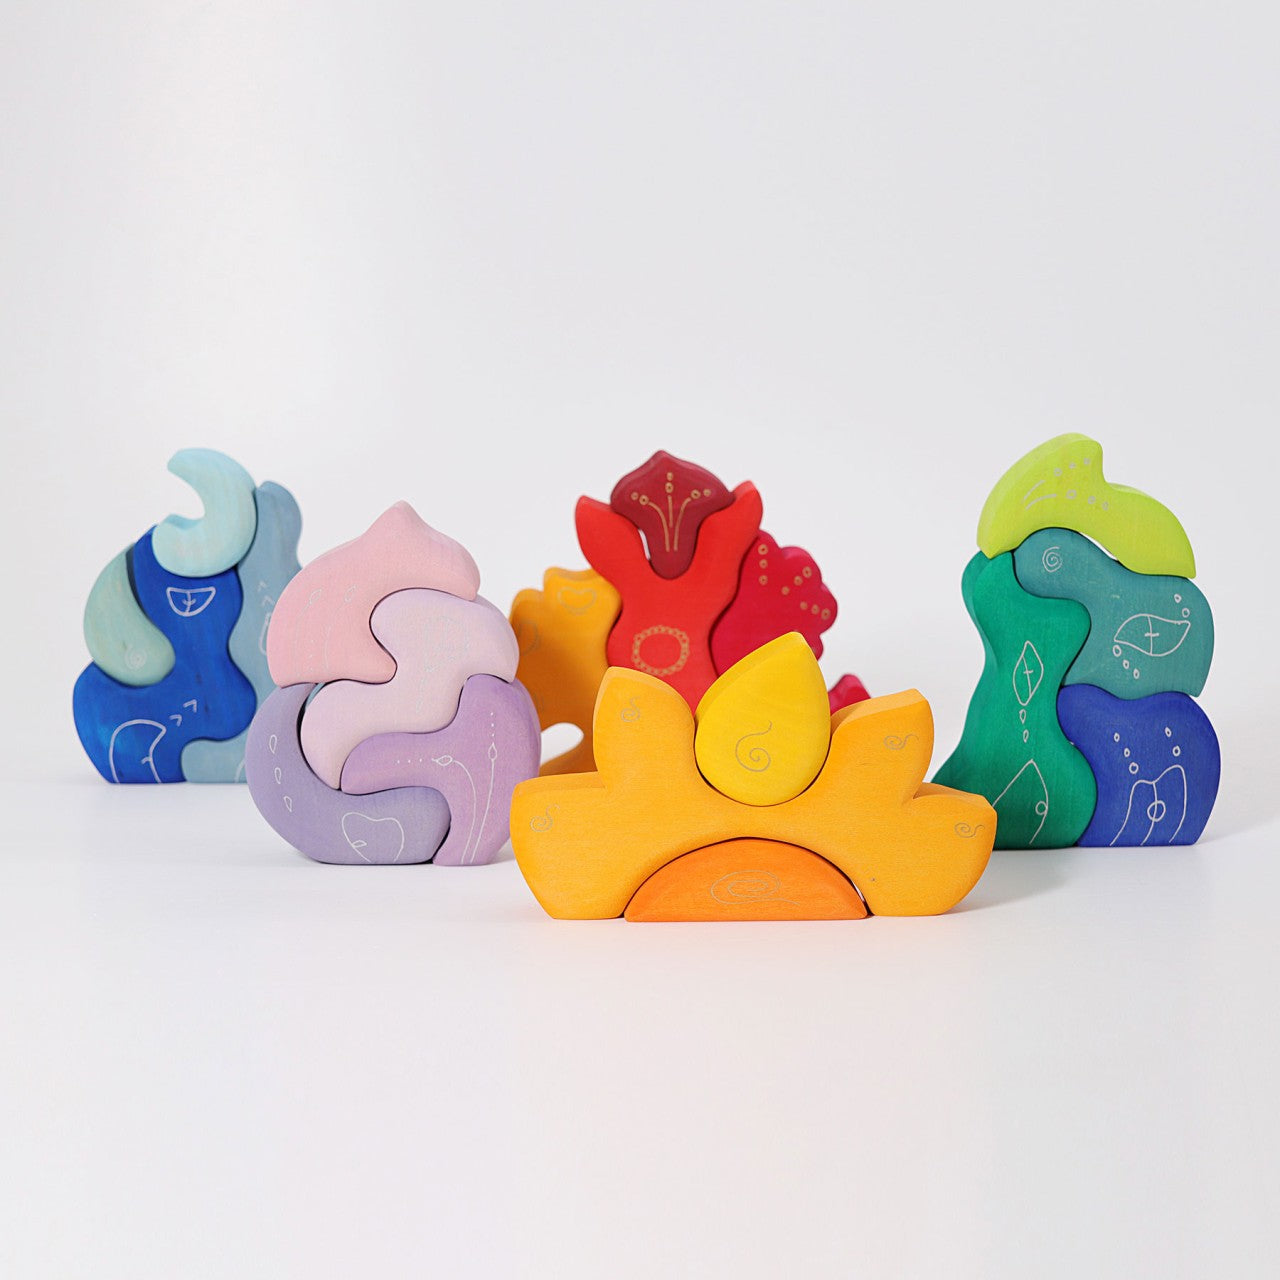 Casa Aqua | 4 Pieces | Wooden Toys for Kids | Open-Ended Play